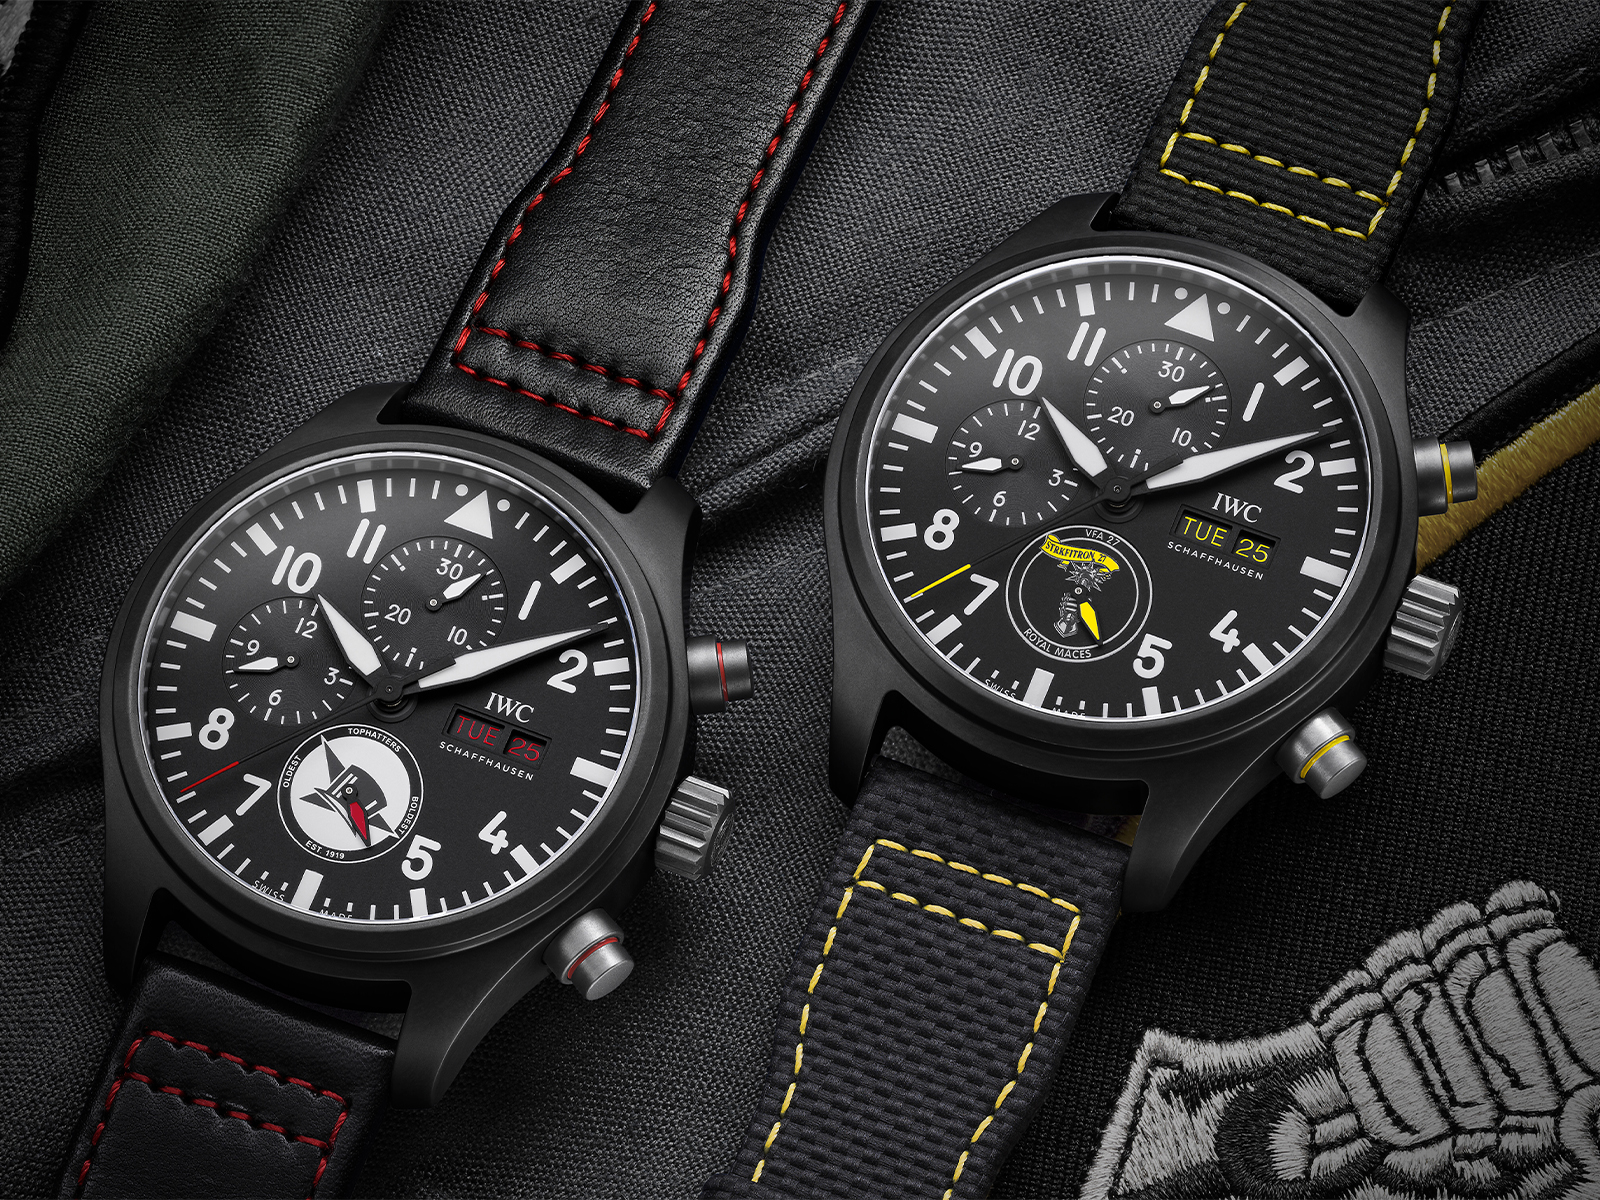 The IWC Pilot’s Watch Chronograph Edition “Royal Maces” and the Pilot’s Watch Chronograph Edition “Tophatters”